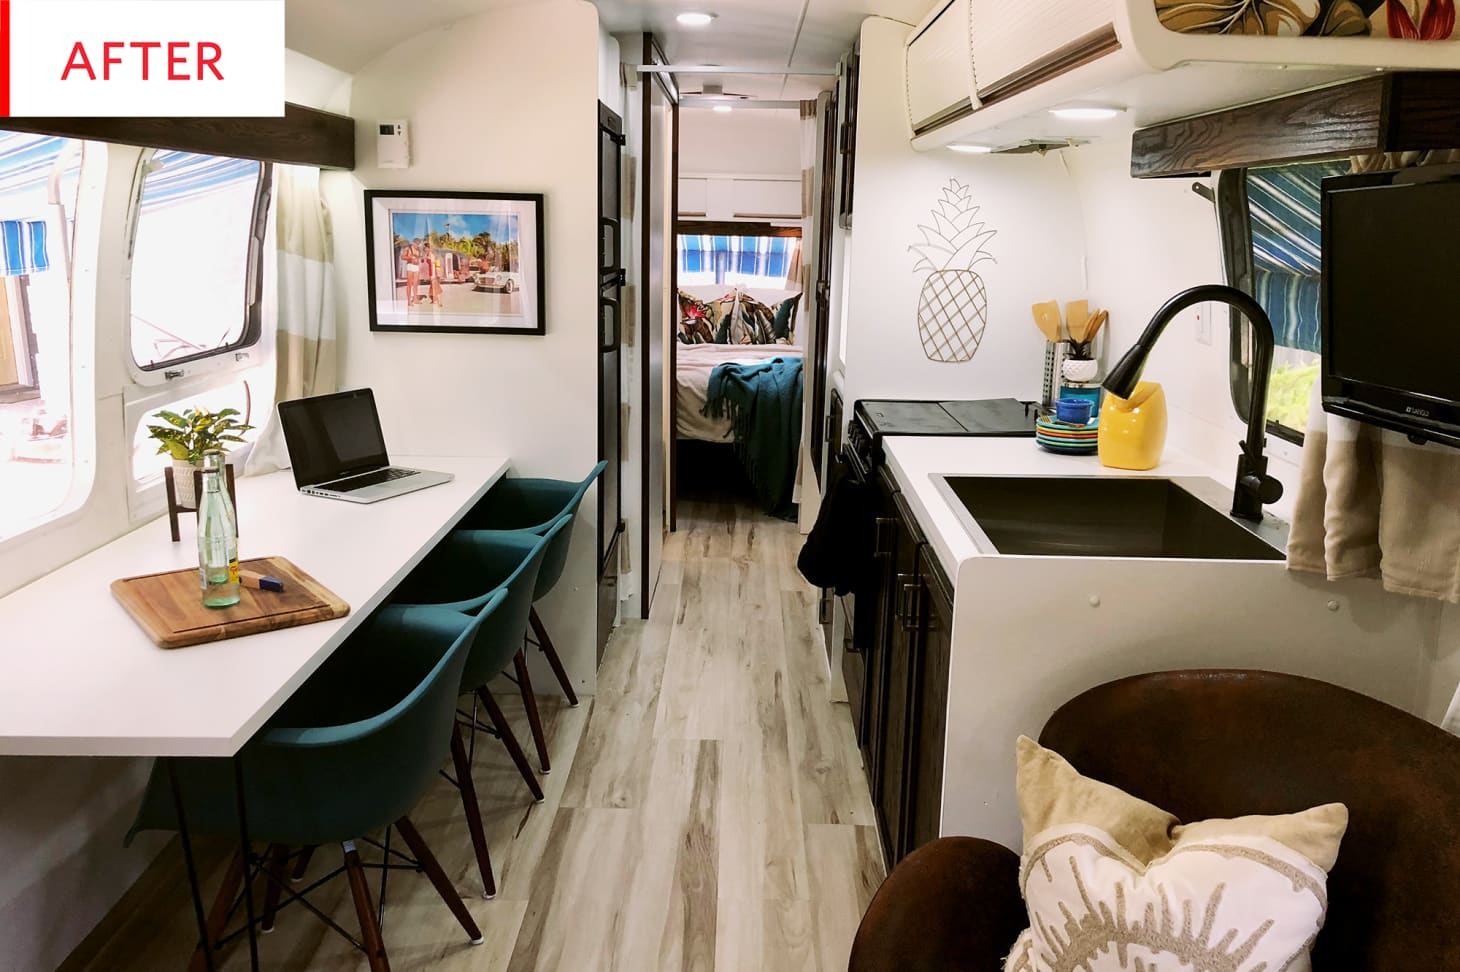 Airstream Trailer Renovation Before And After Photos